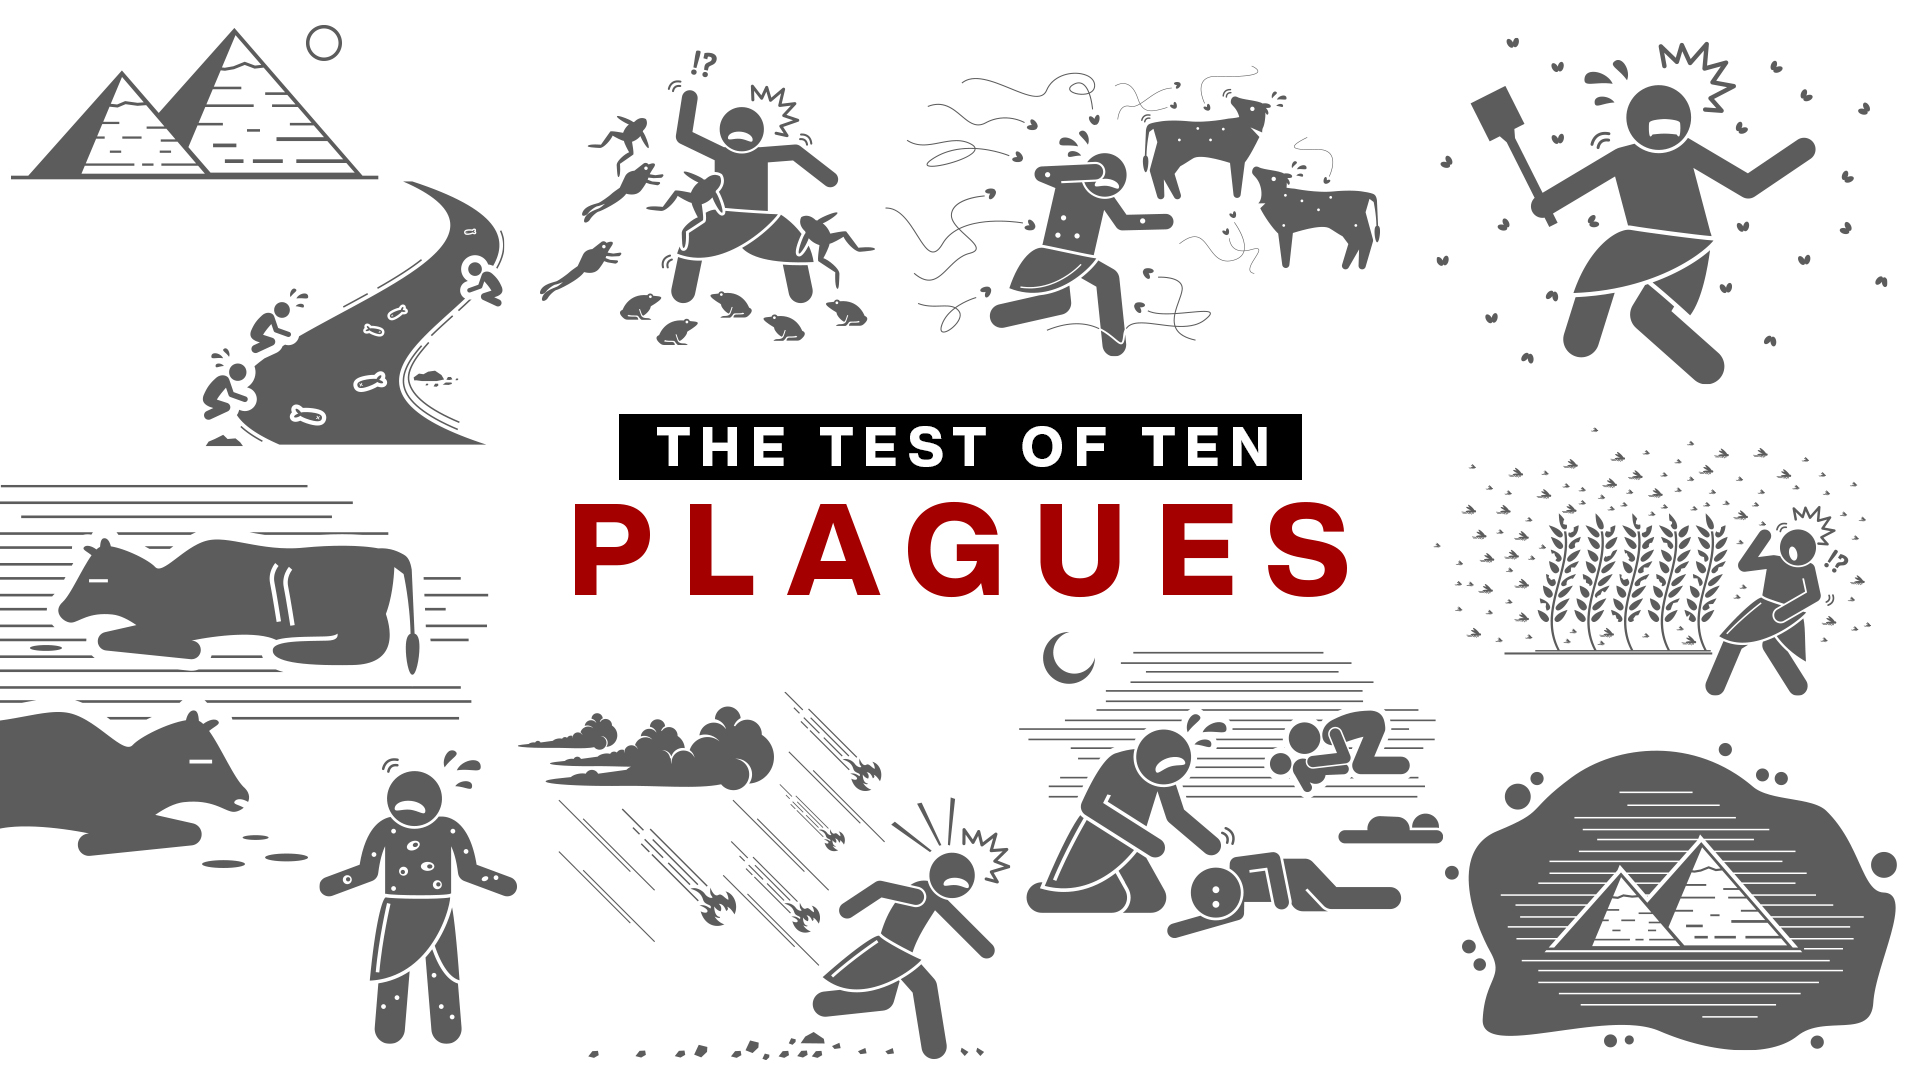 The Test of Ten Plagues